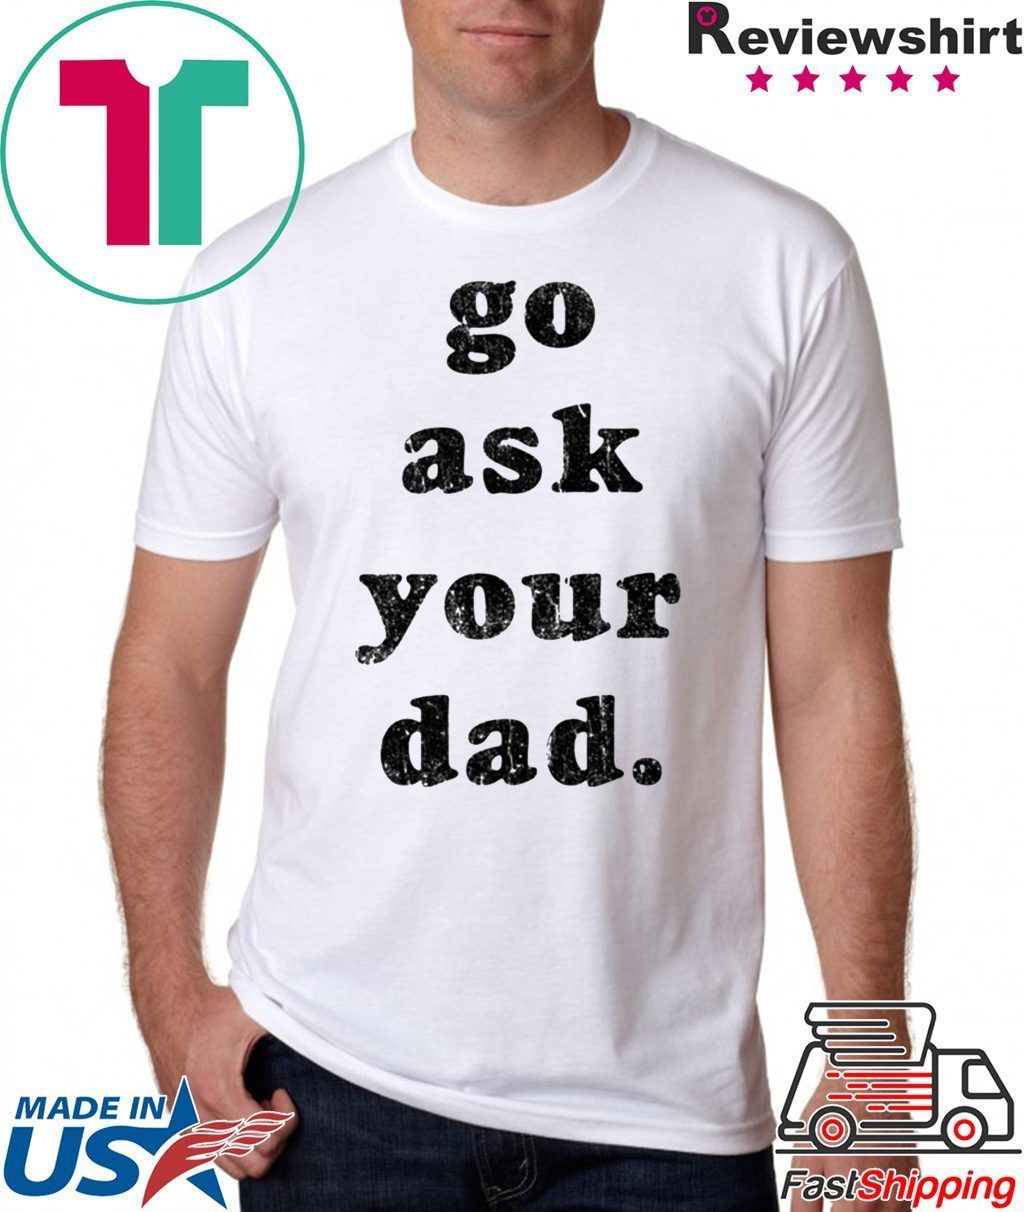 Go Ask Your Dad Shirt Reviewshirts Office